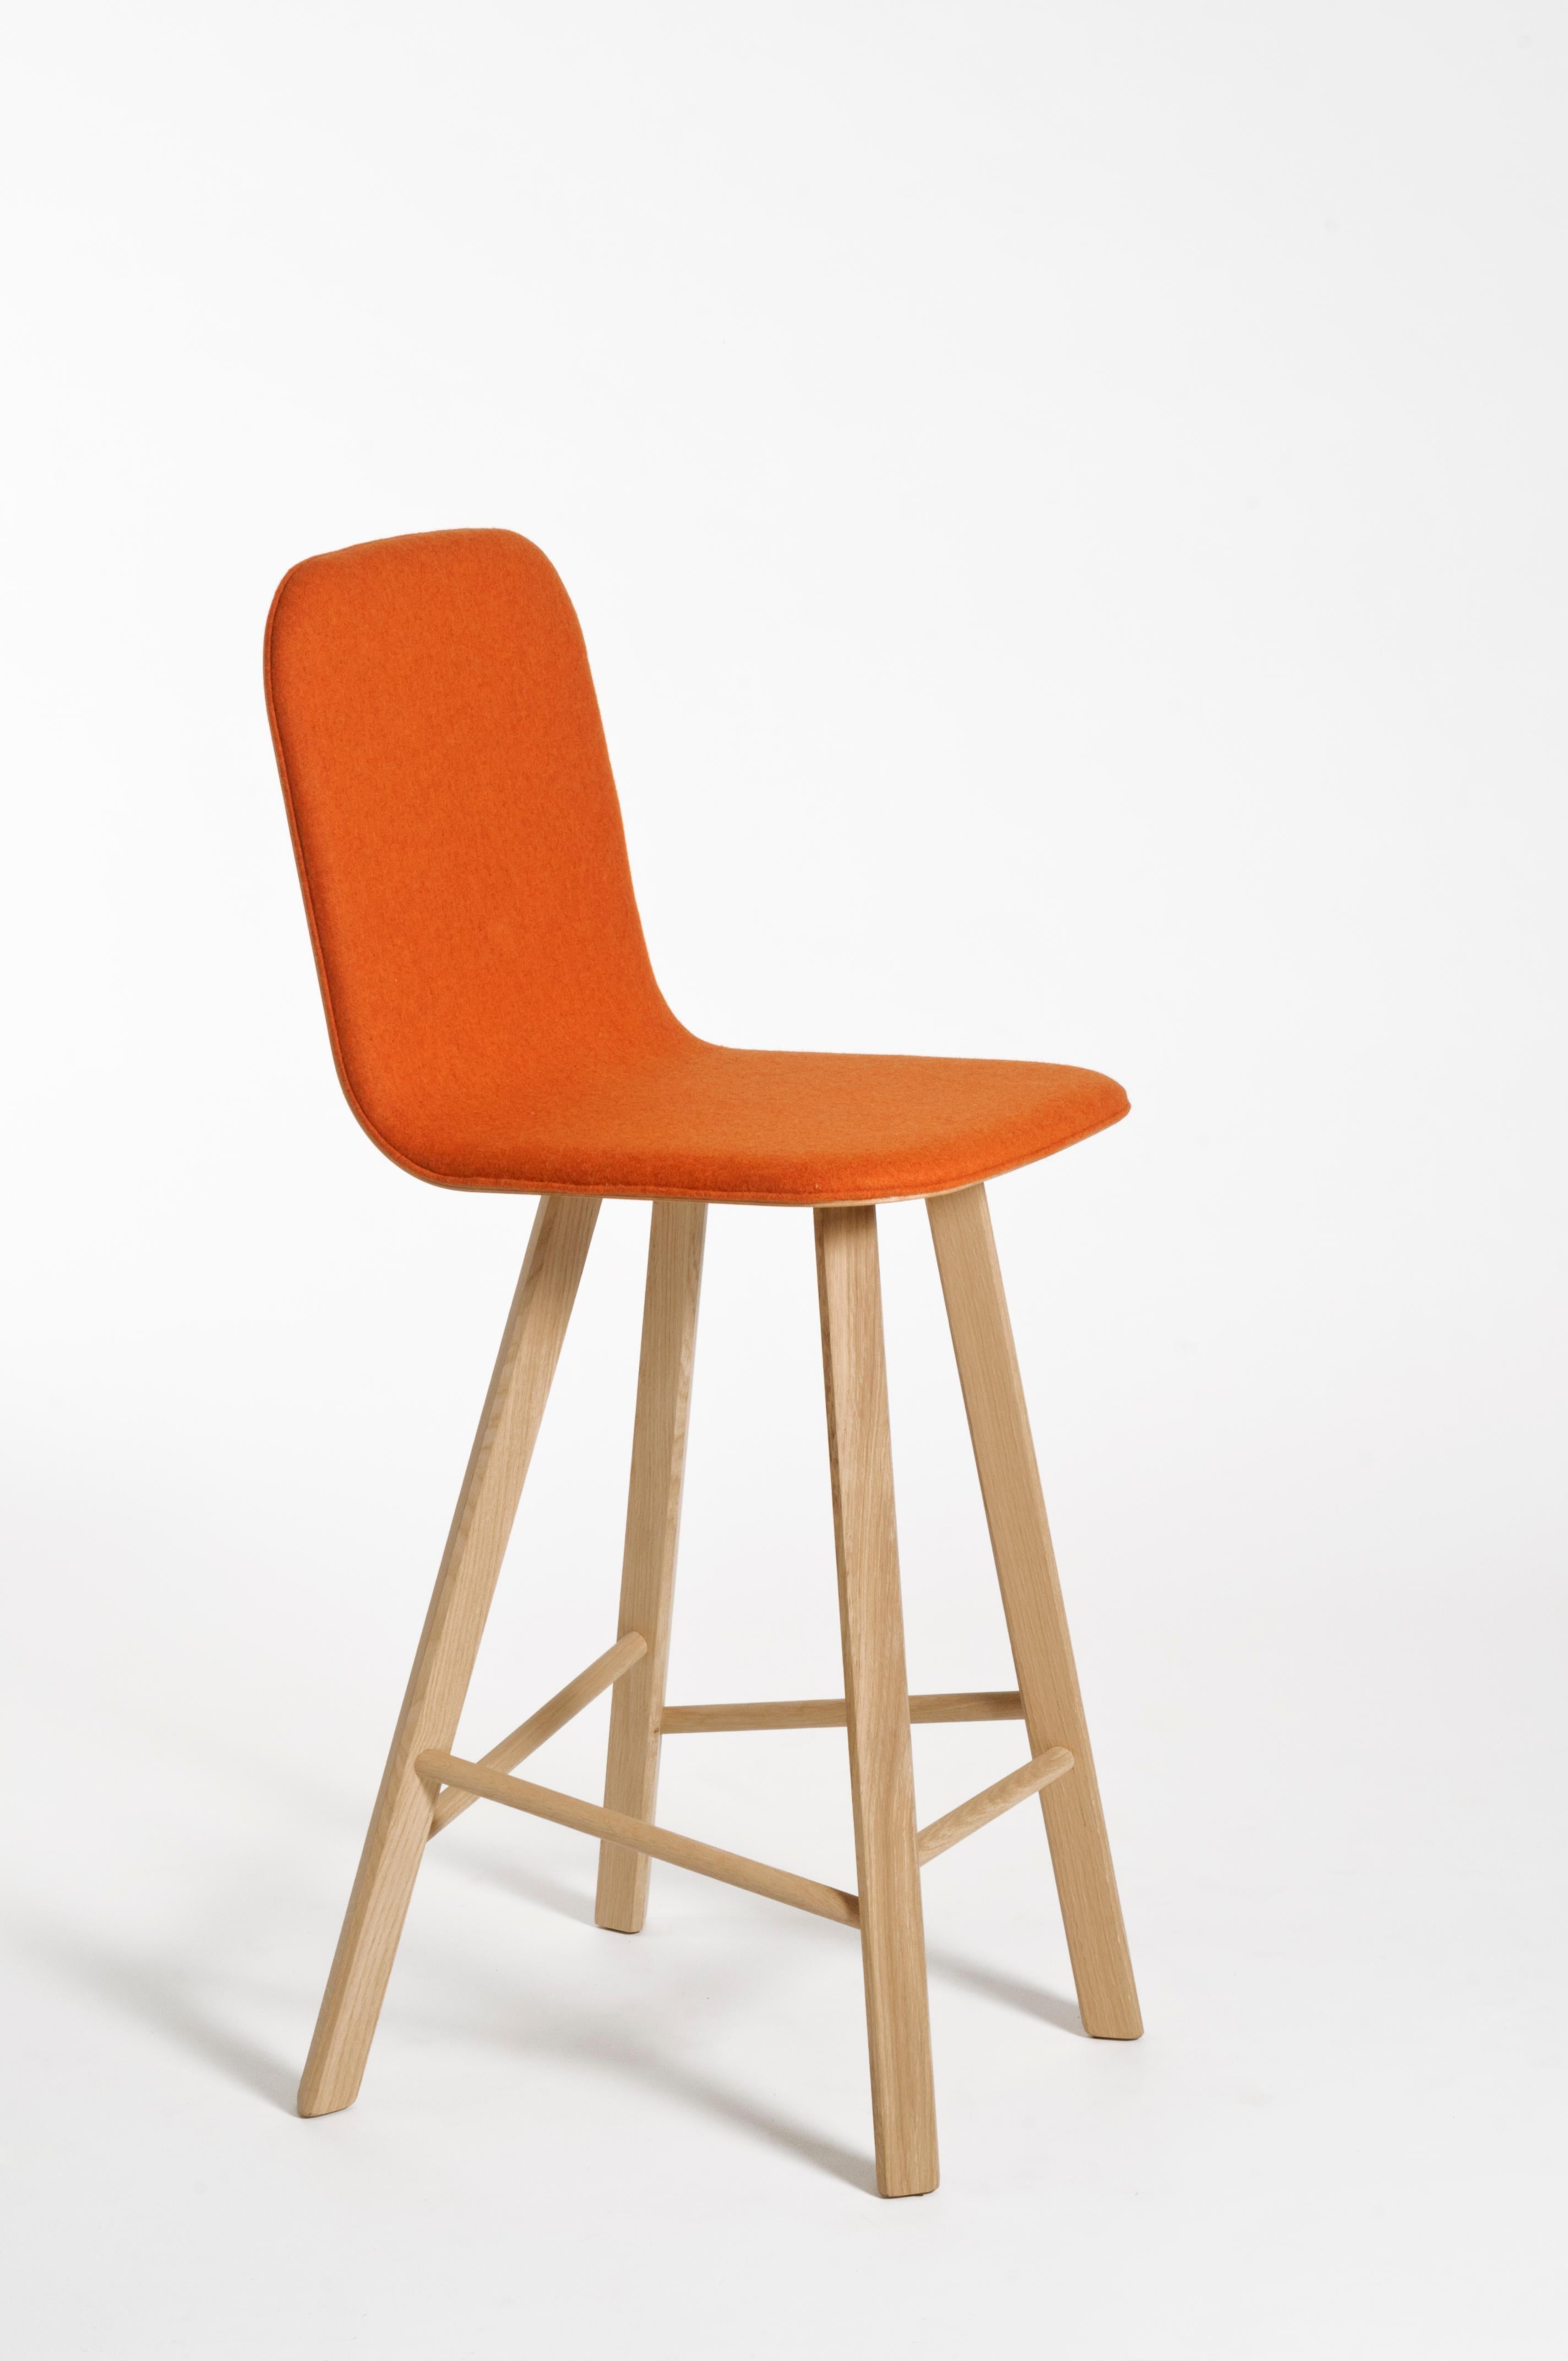 Essential and elegant minimalist stool with a bent plywood shell and four iconic legs with triangular shape in solid oak, joined by transversal wooden bars. The seat can have High Back as listed, for a very comfortable long time seating, or Low Back